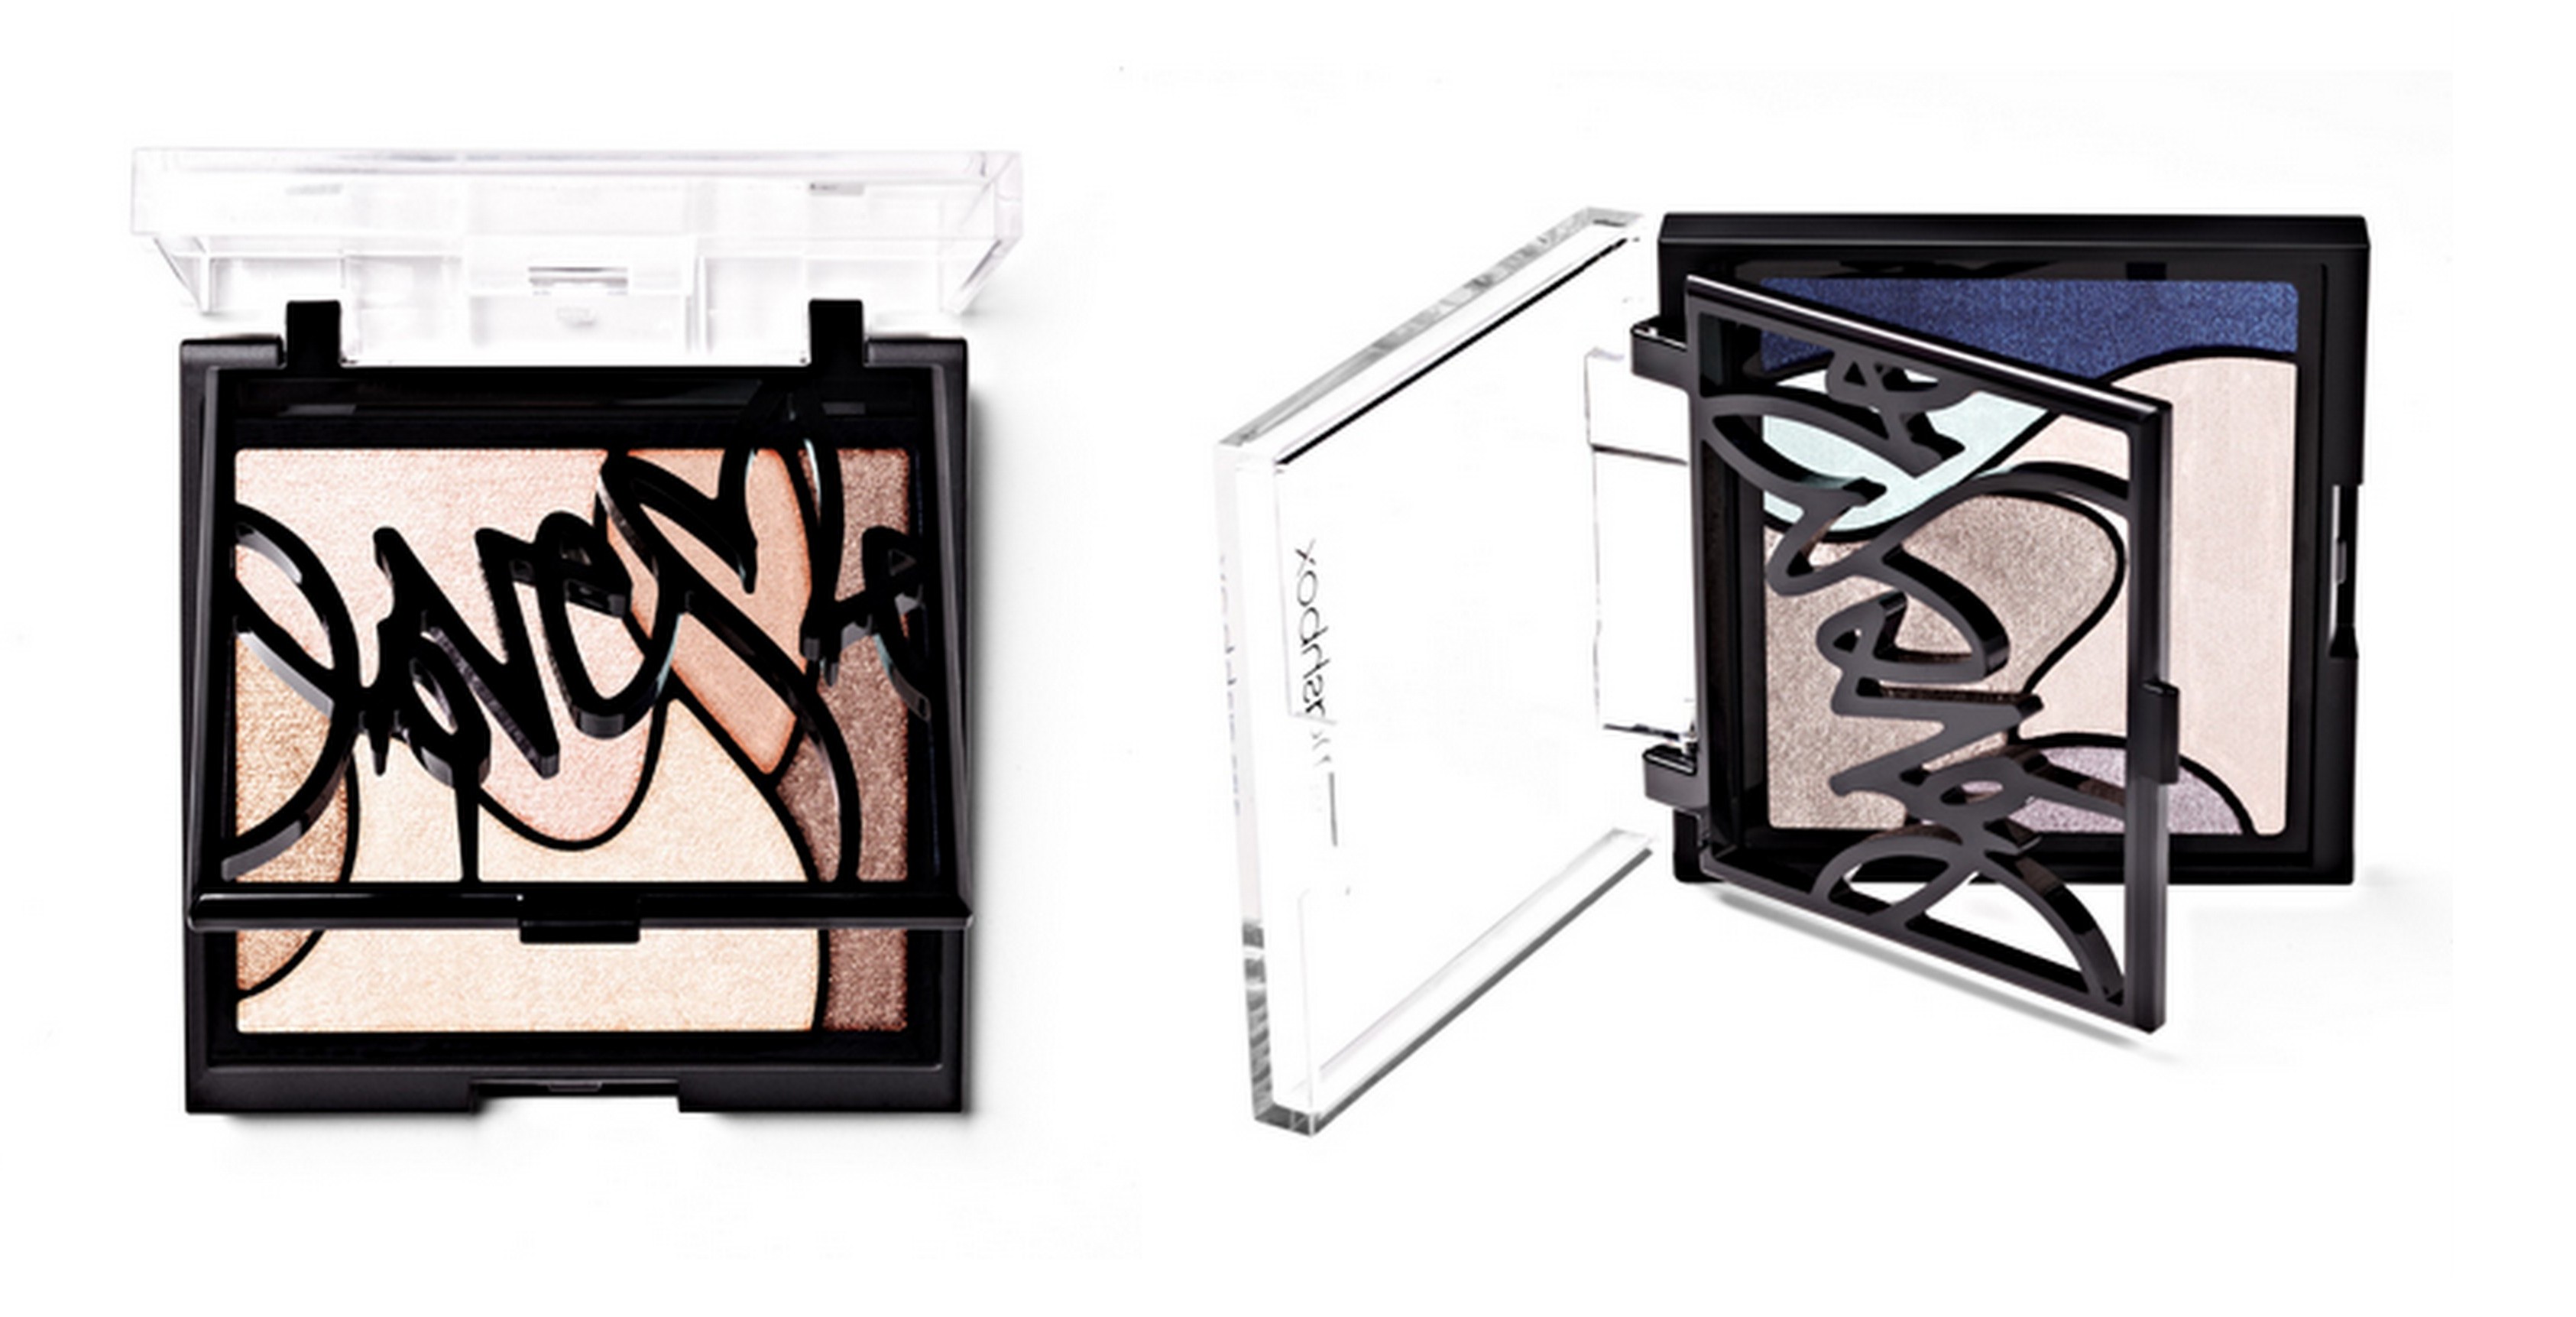 Smashbox Spring 2013 Love Me Collection